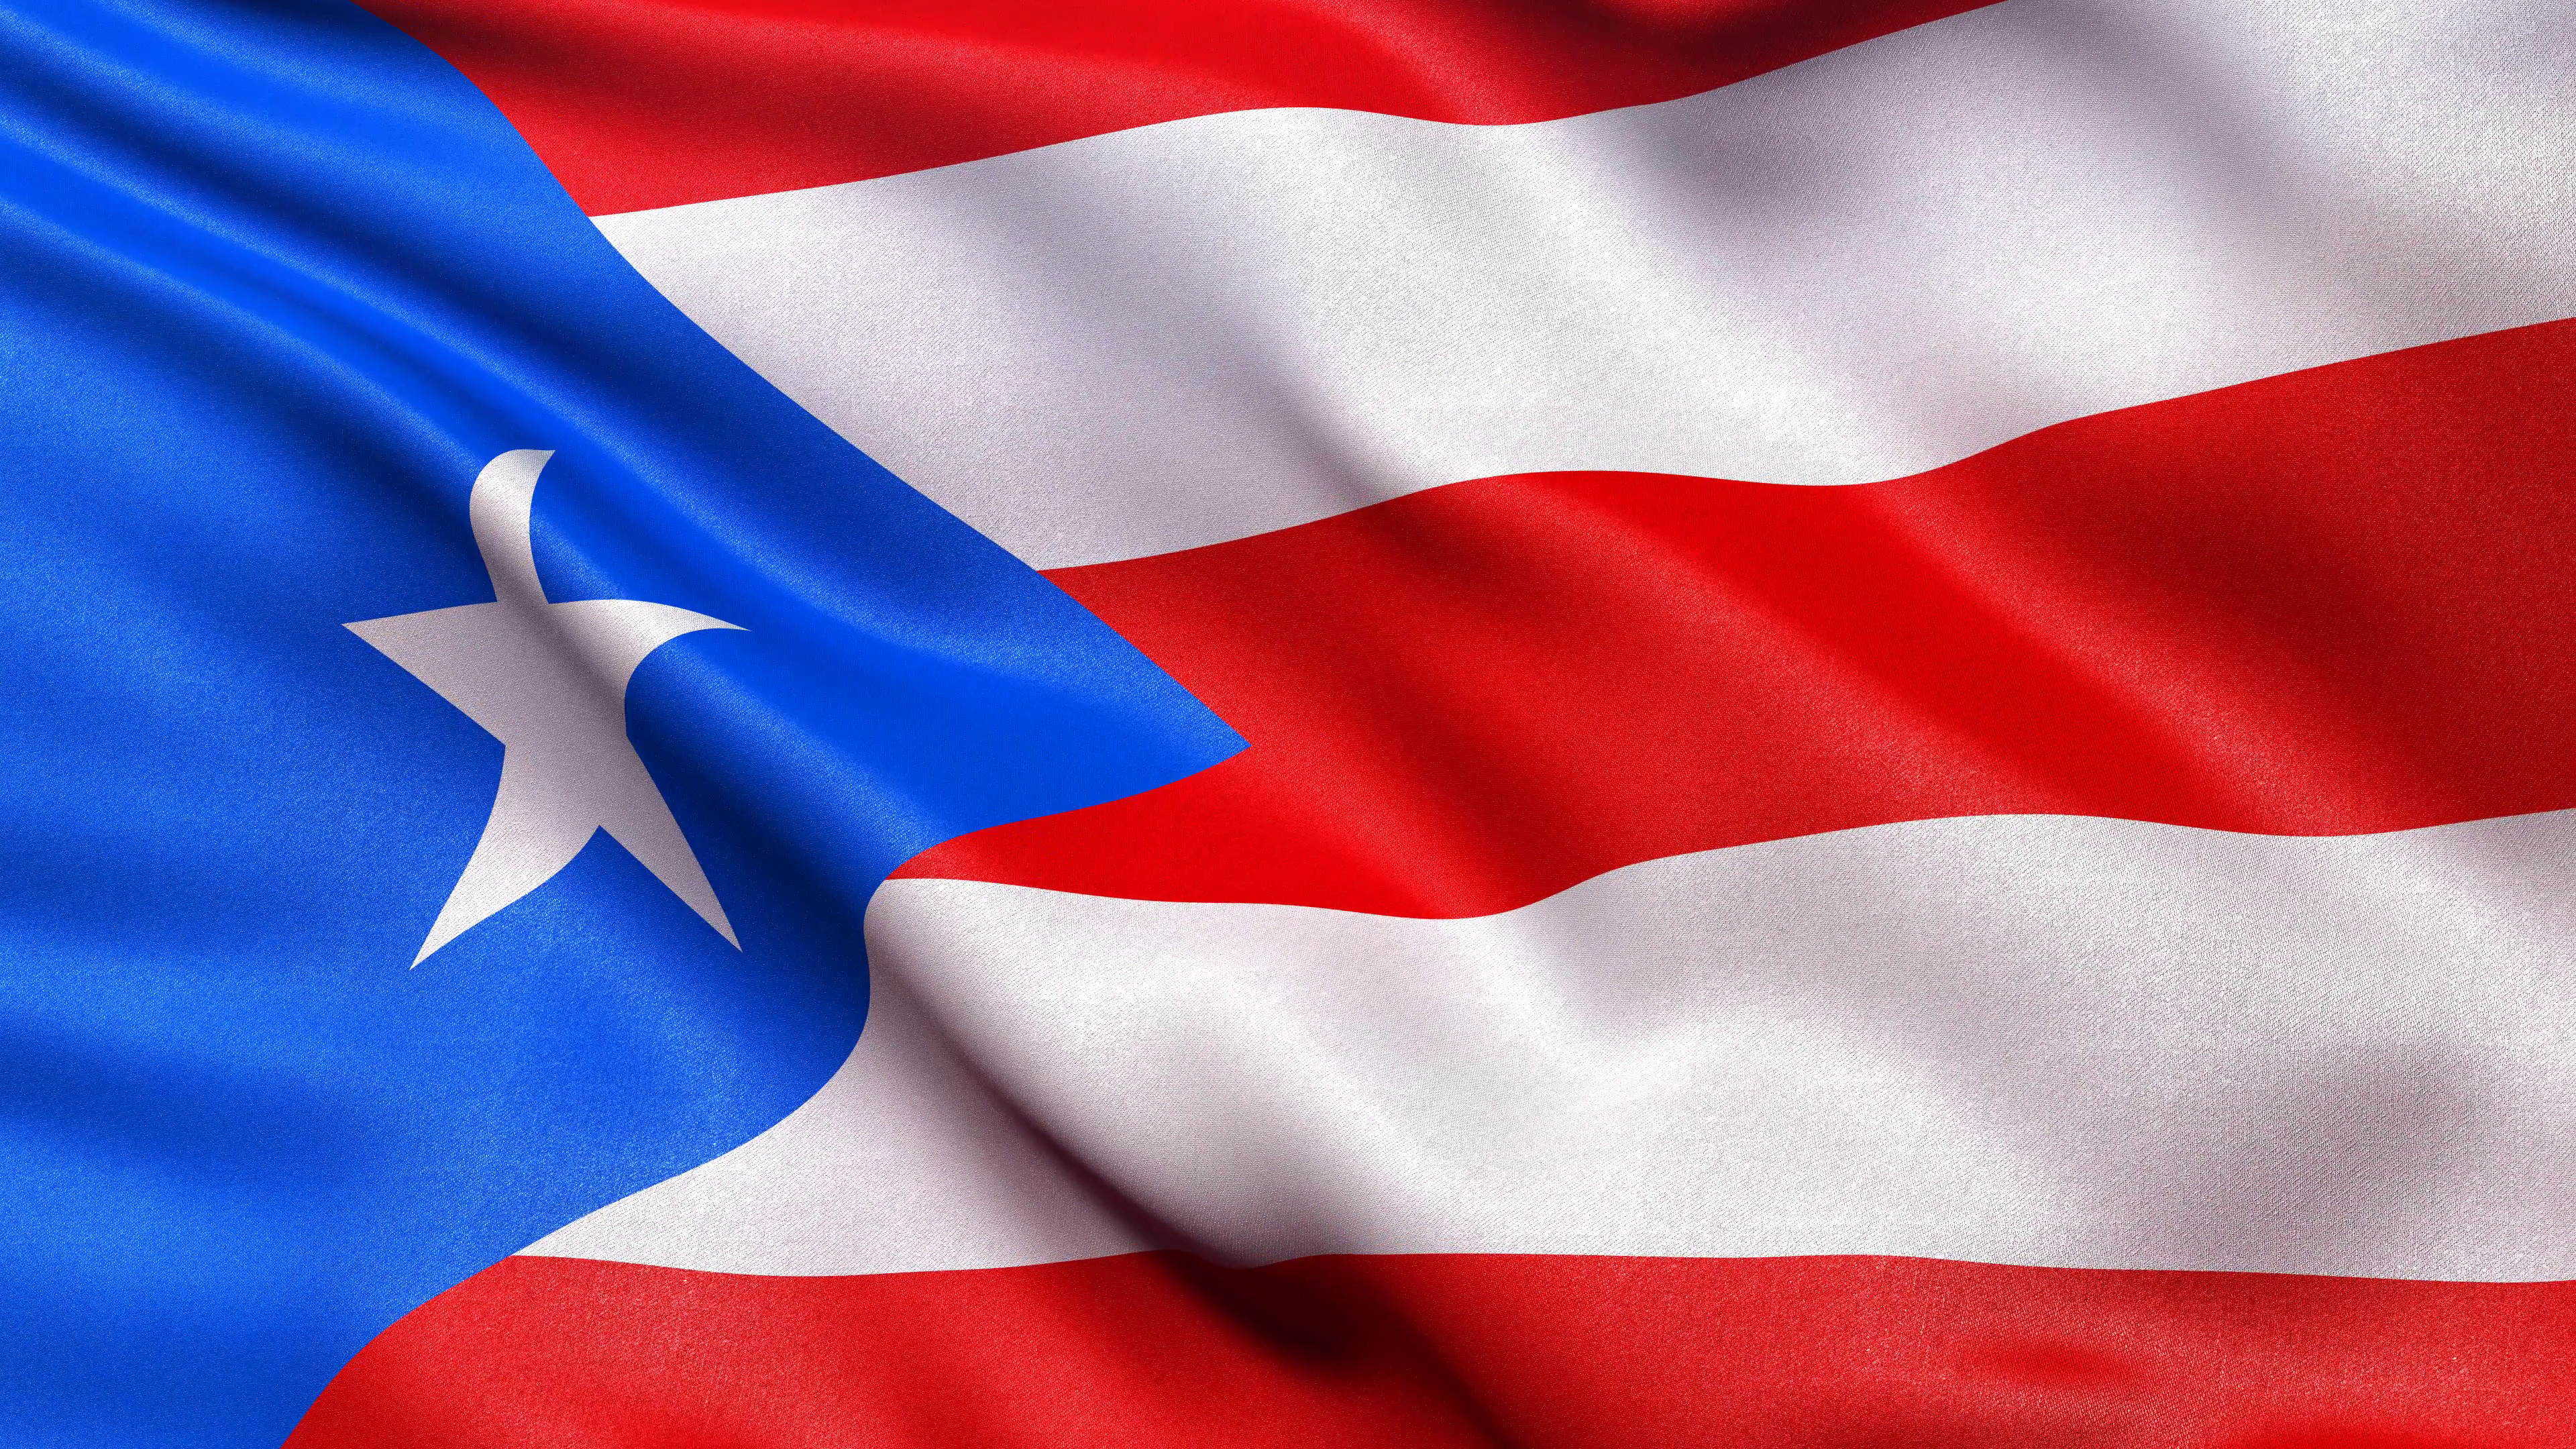 3840x2160 Realistic flag of Puerto Rico waving in the wind. Seamless loop with highly  detailed fabric texture. Loop ready in 4K resolution.